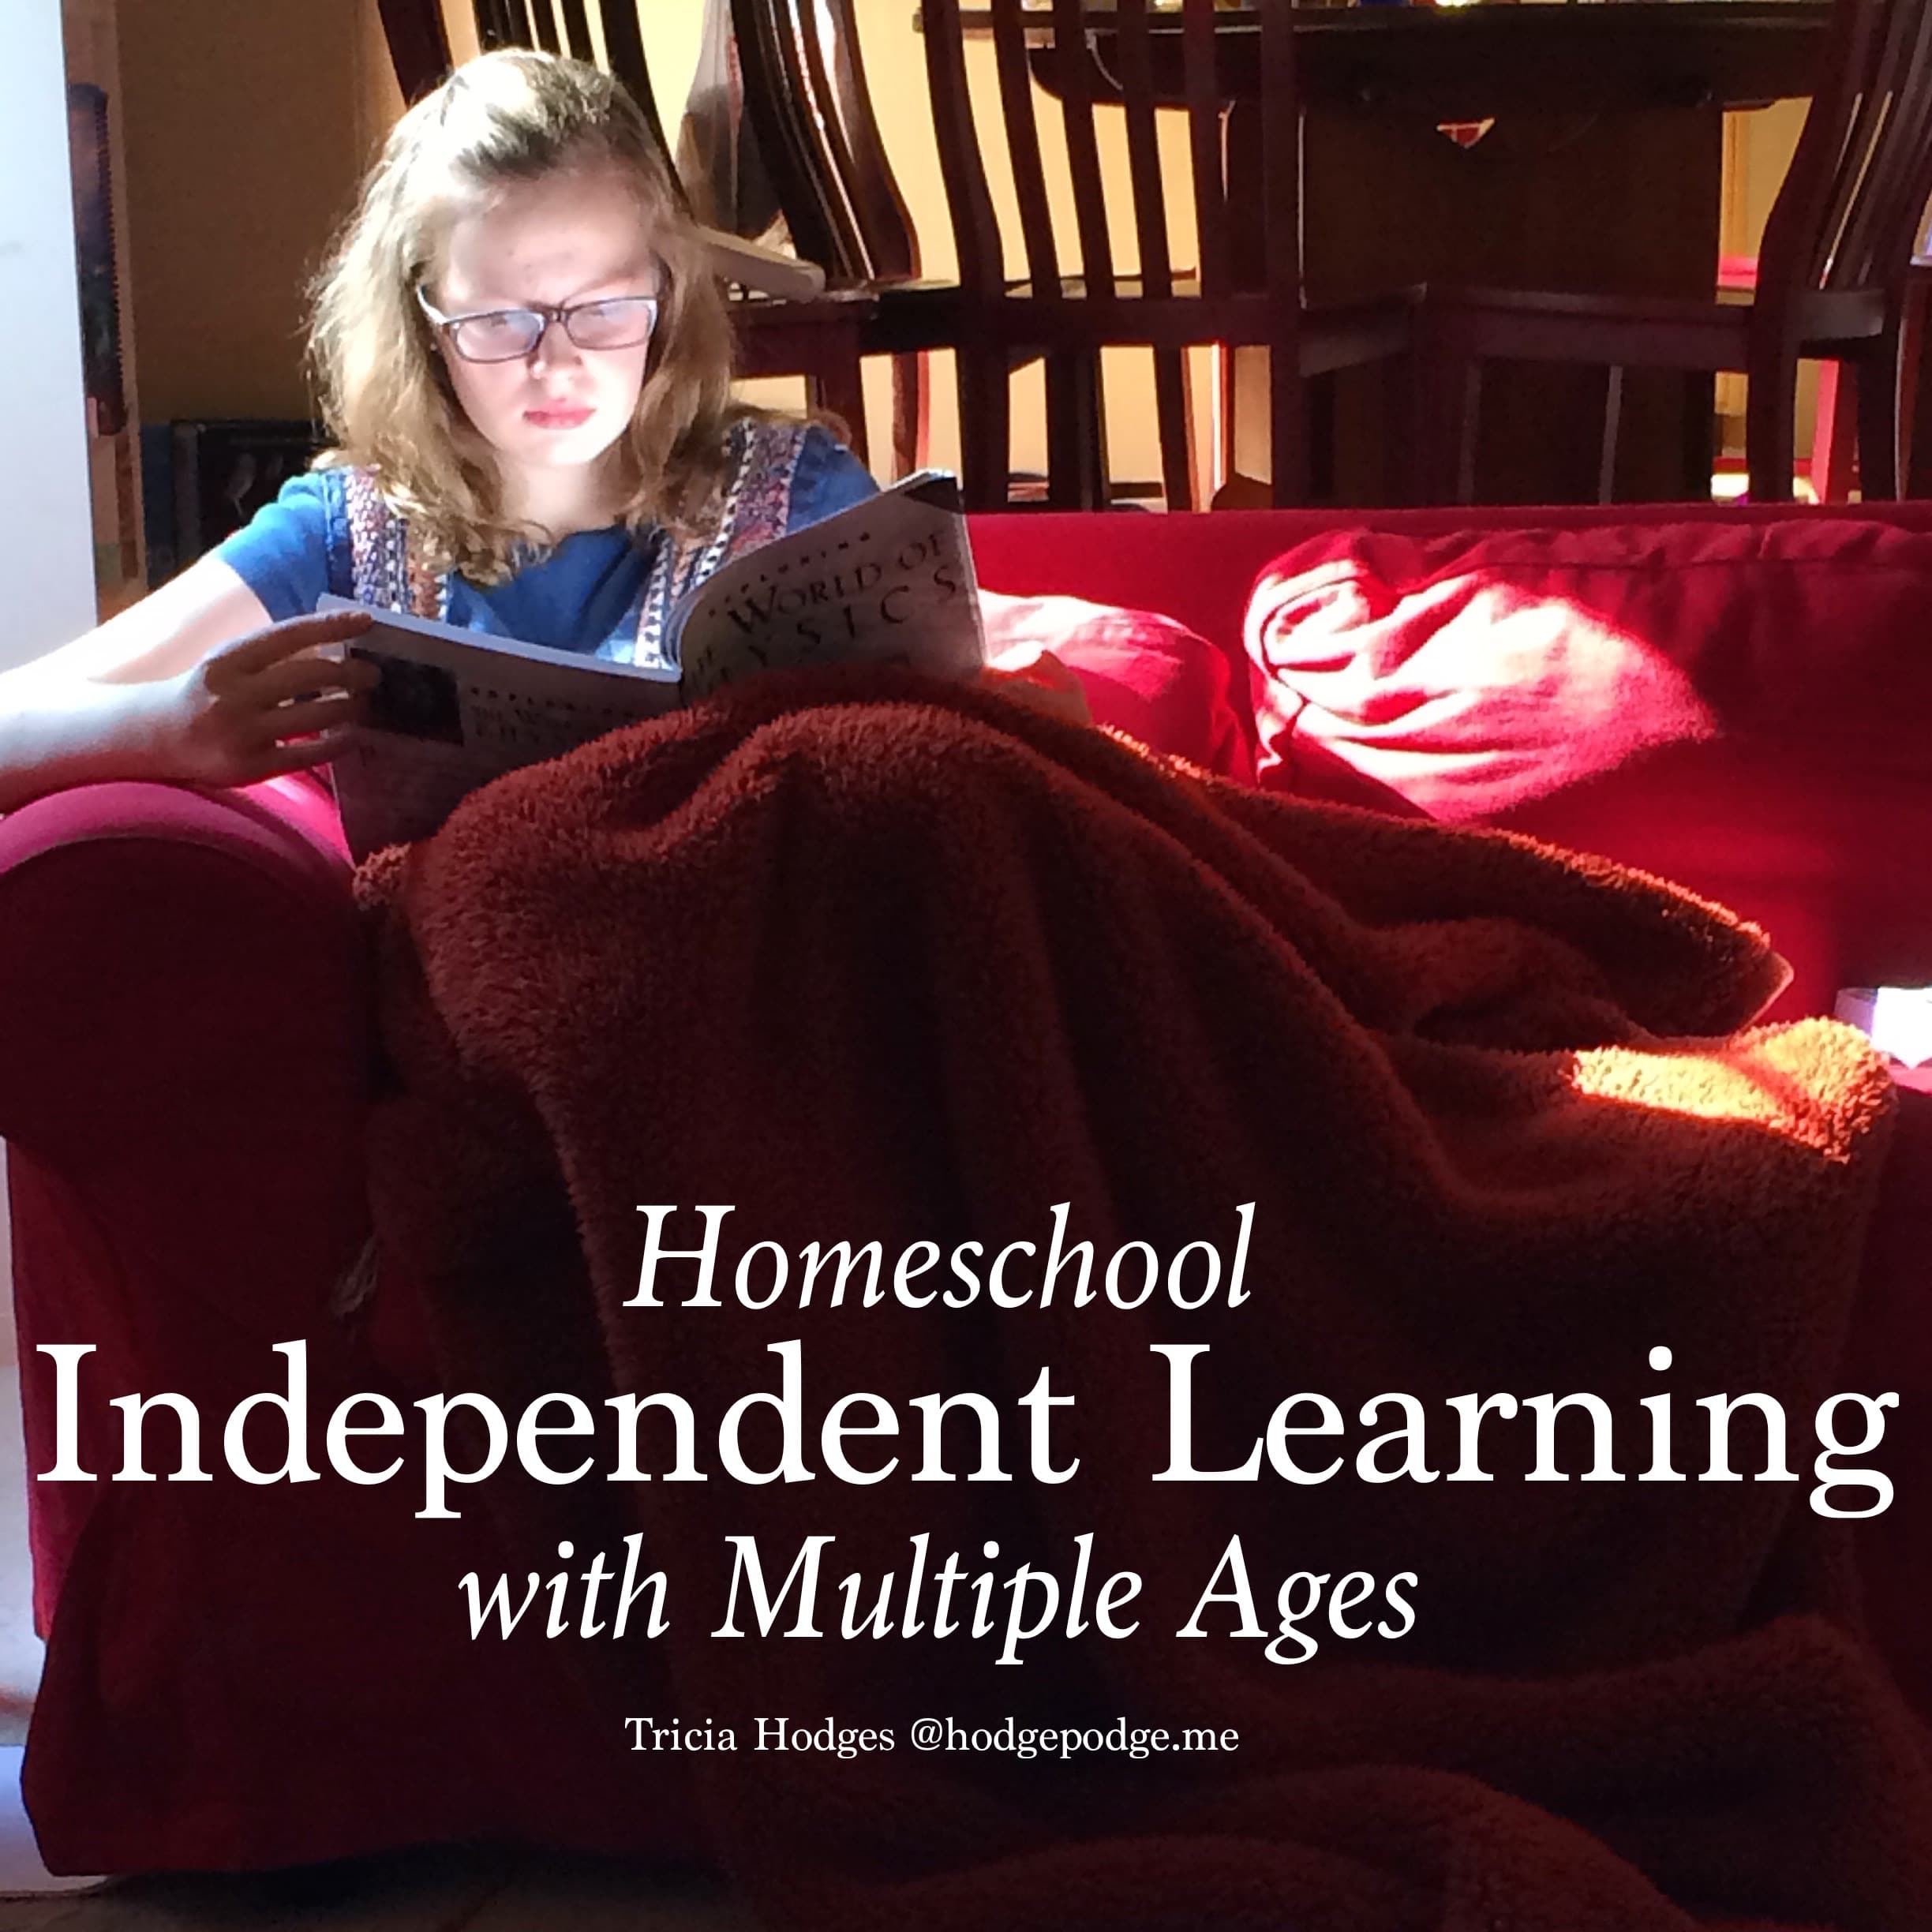 Homeschool Independent Learning